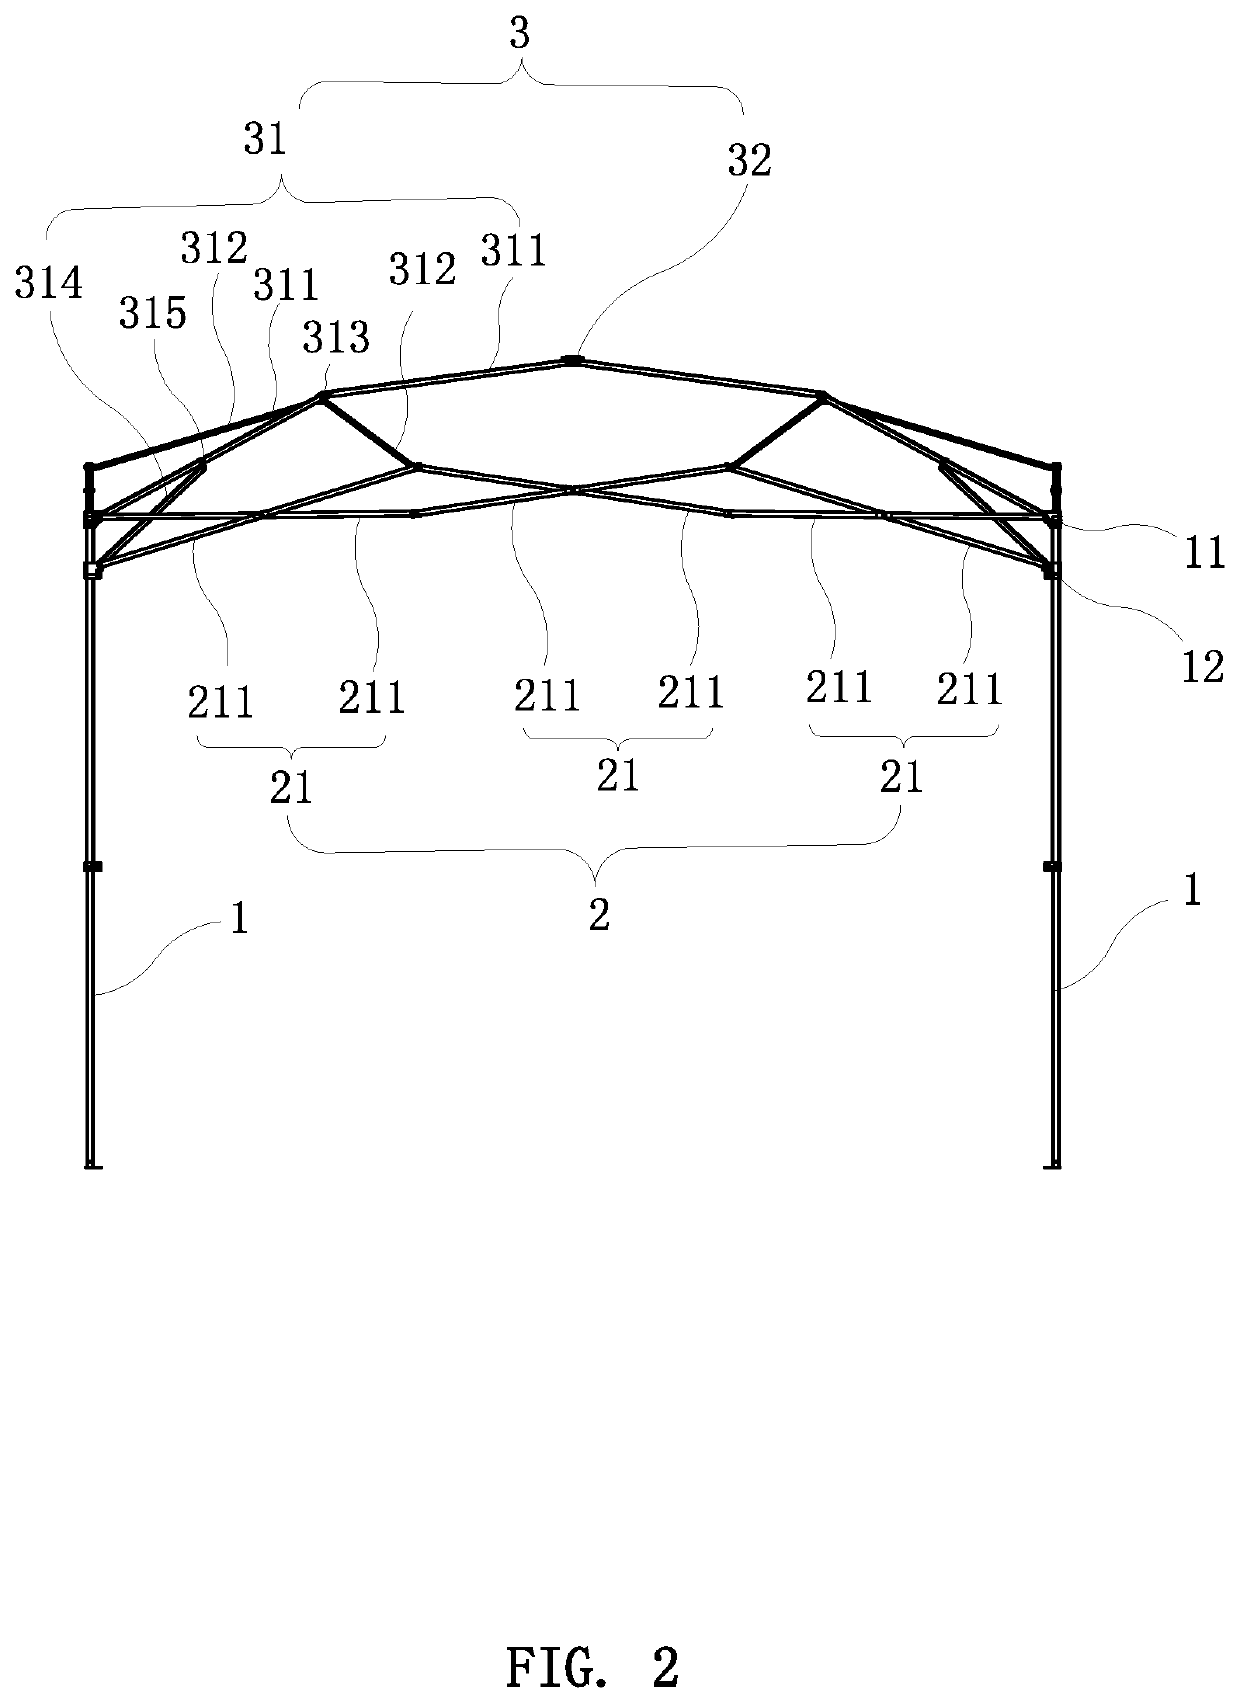 Improved pole frame structure of foldable tent